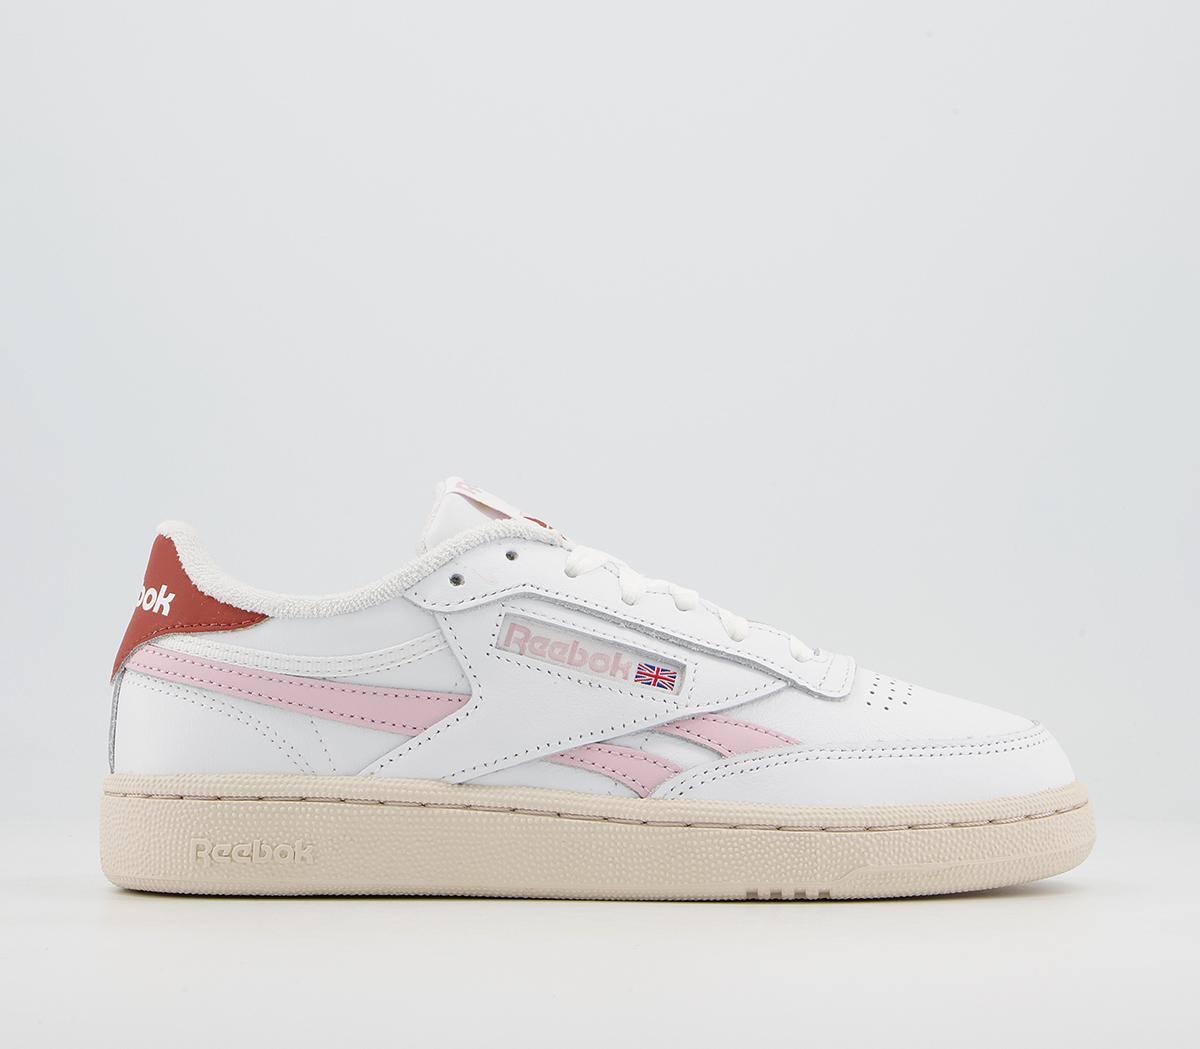 ReebokClub C Revenge Trainers White Frost Berry Baked Earth